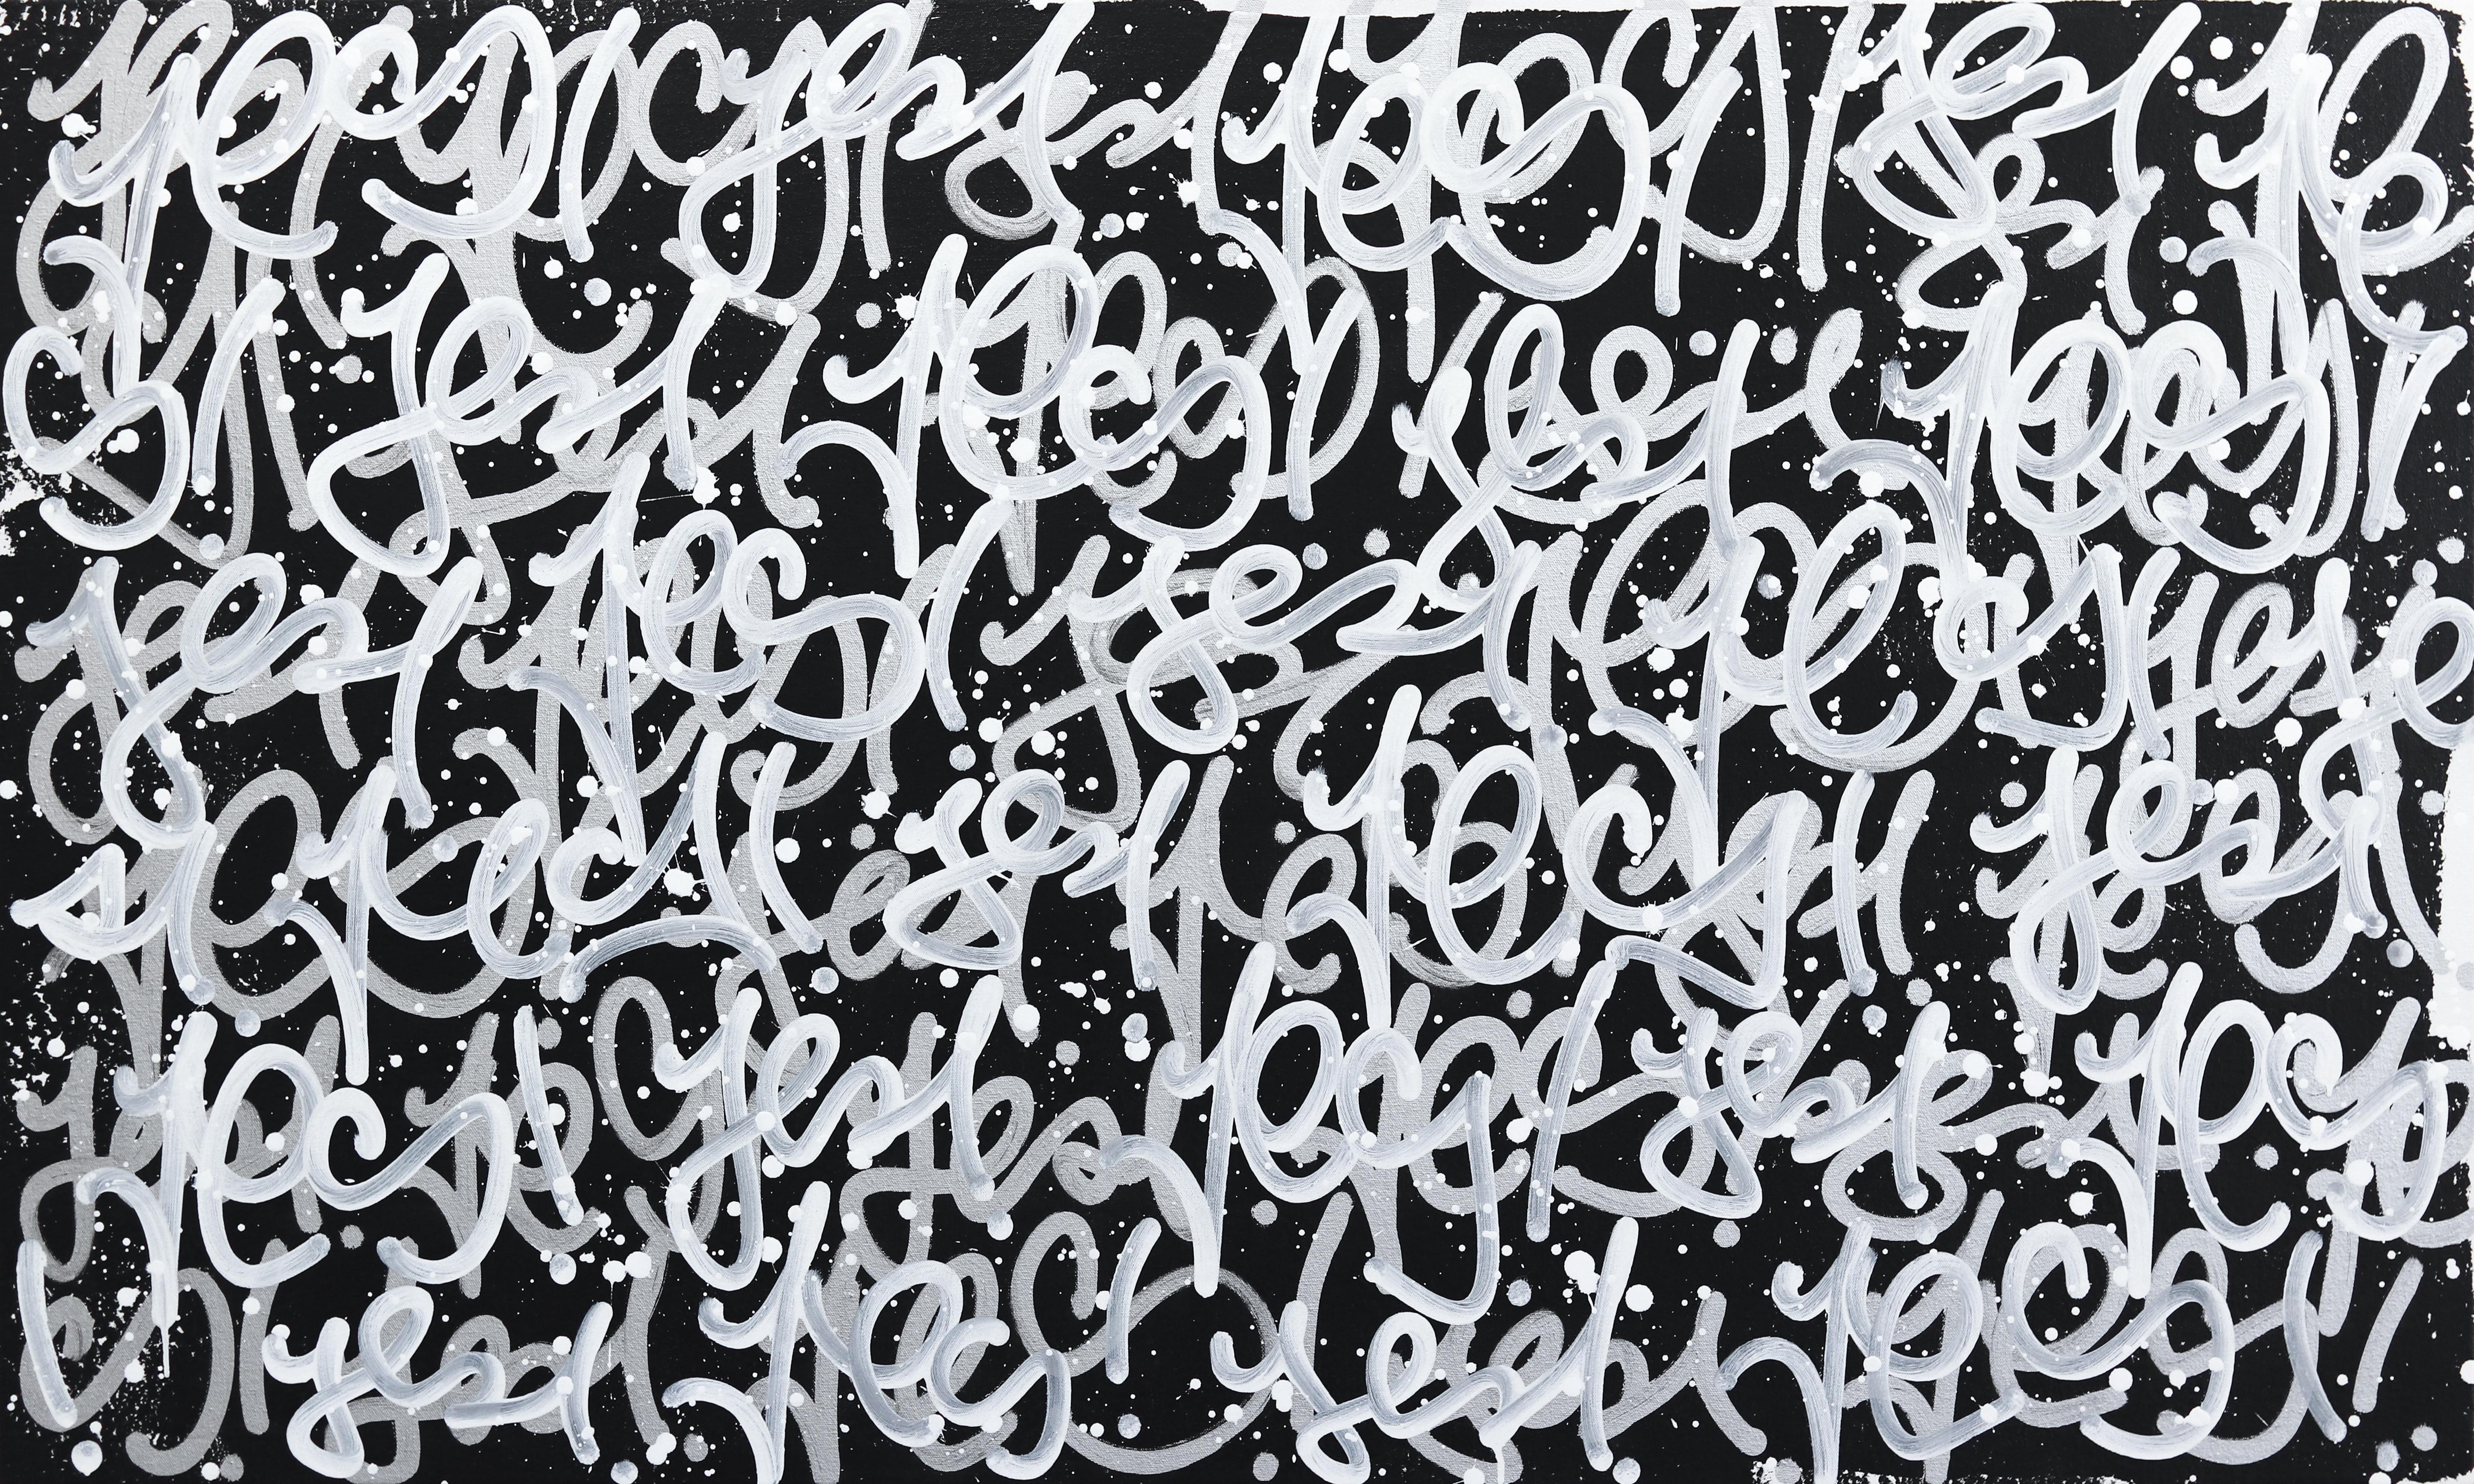 She Said Yes - Black and White Positive Word Art on Canvas - Mixed Media Art by Amber Goldhammer